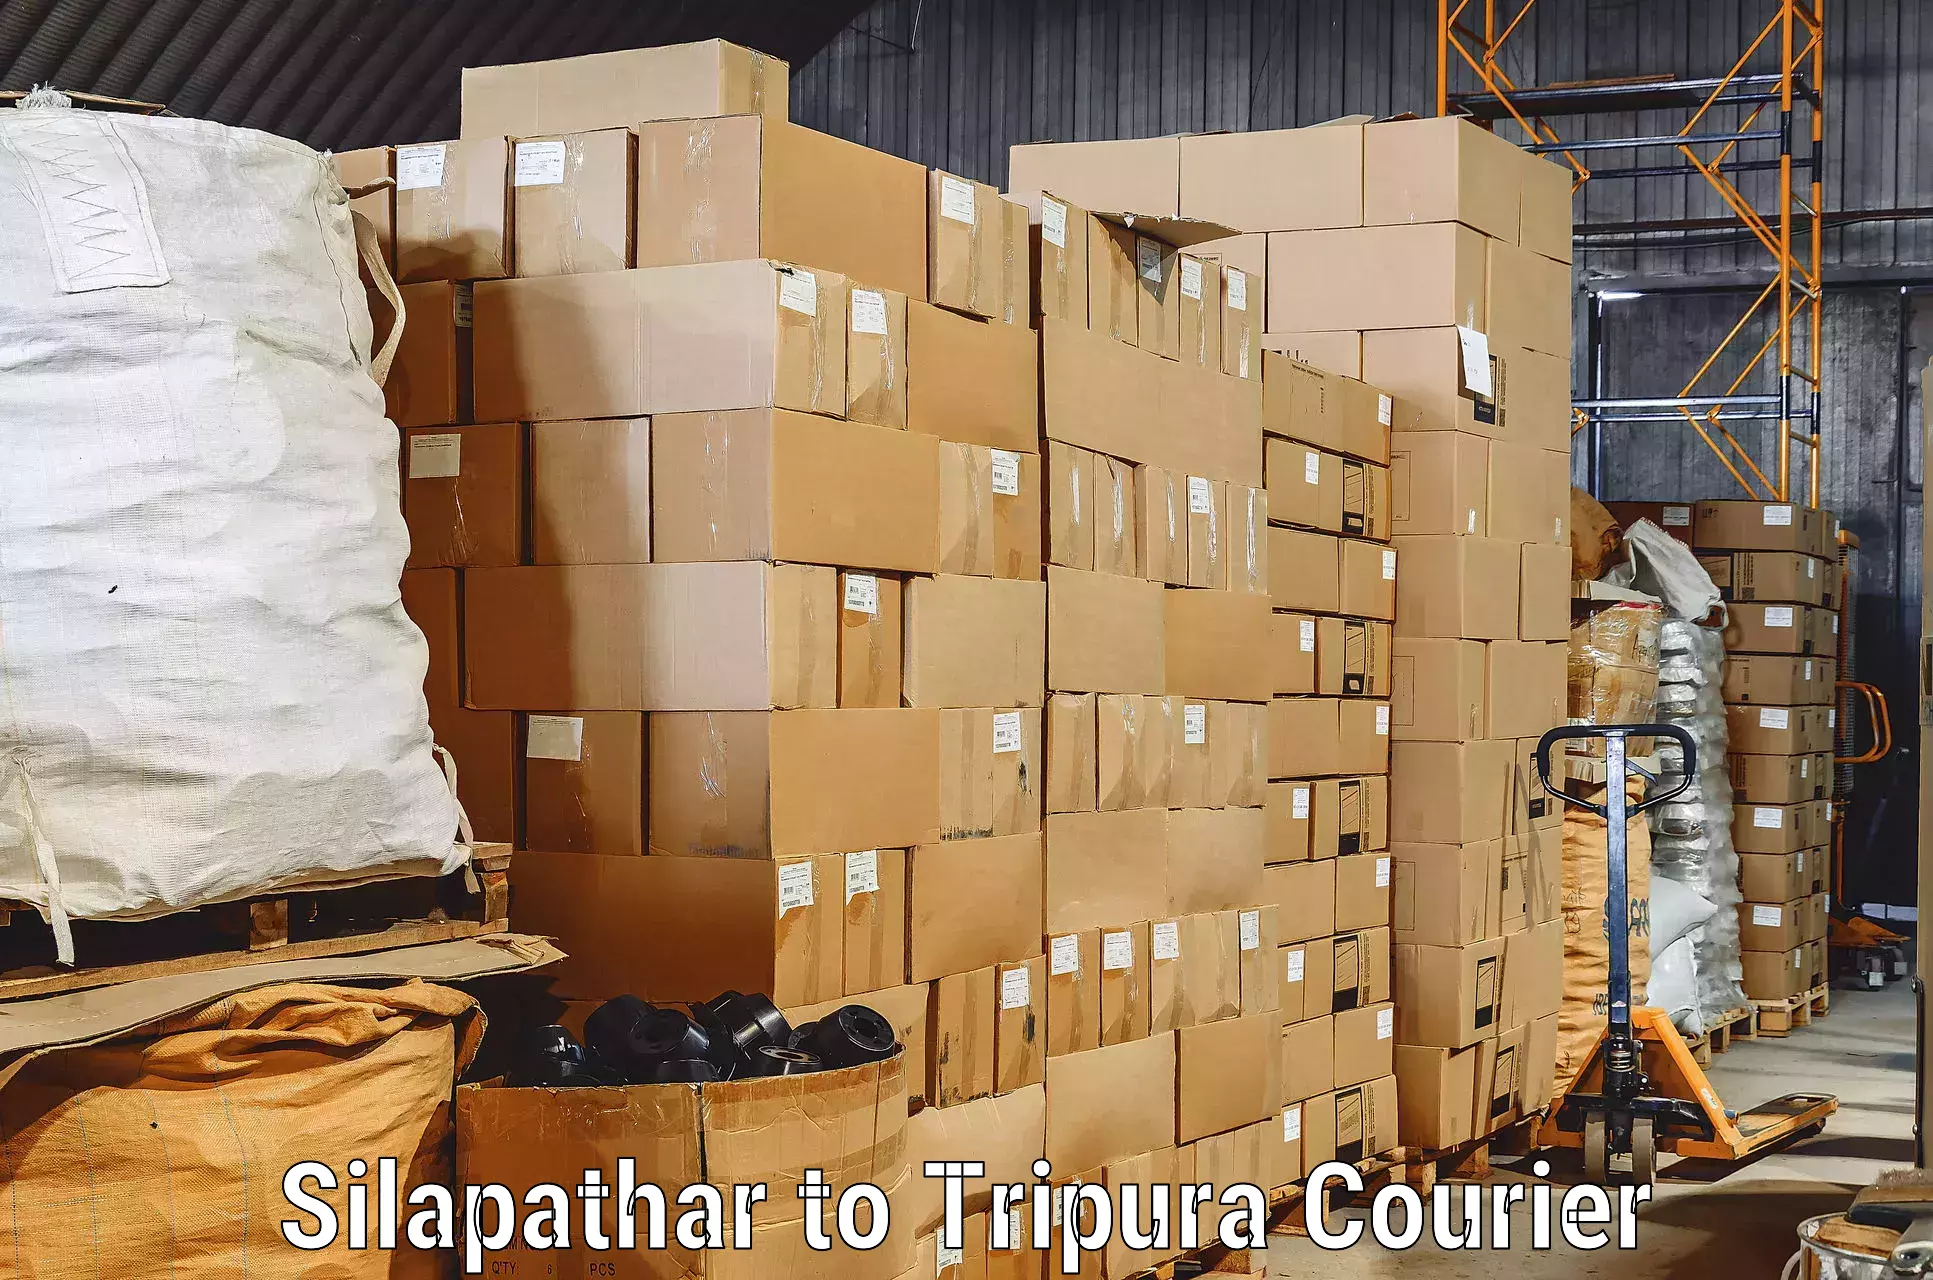 Furniture transport service in Silapathar to Kailashahar